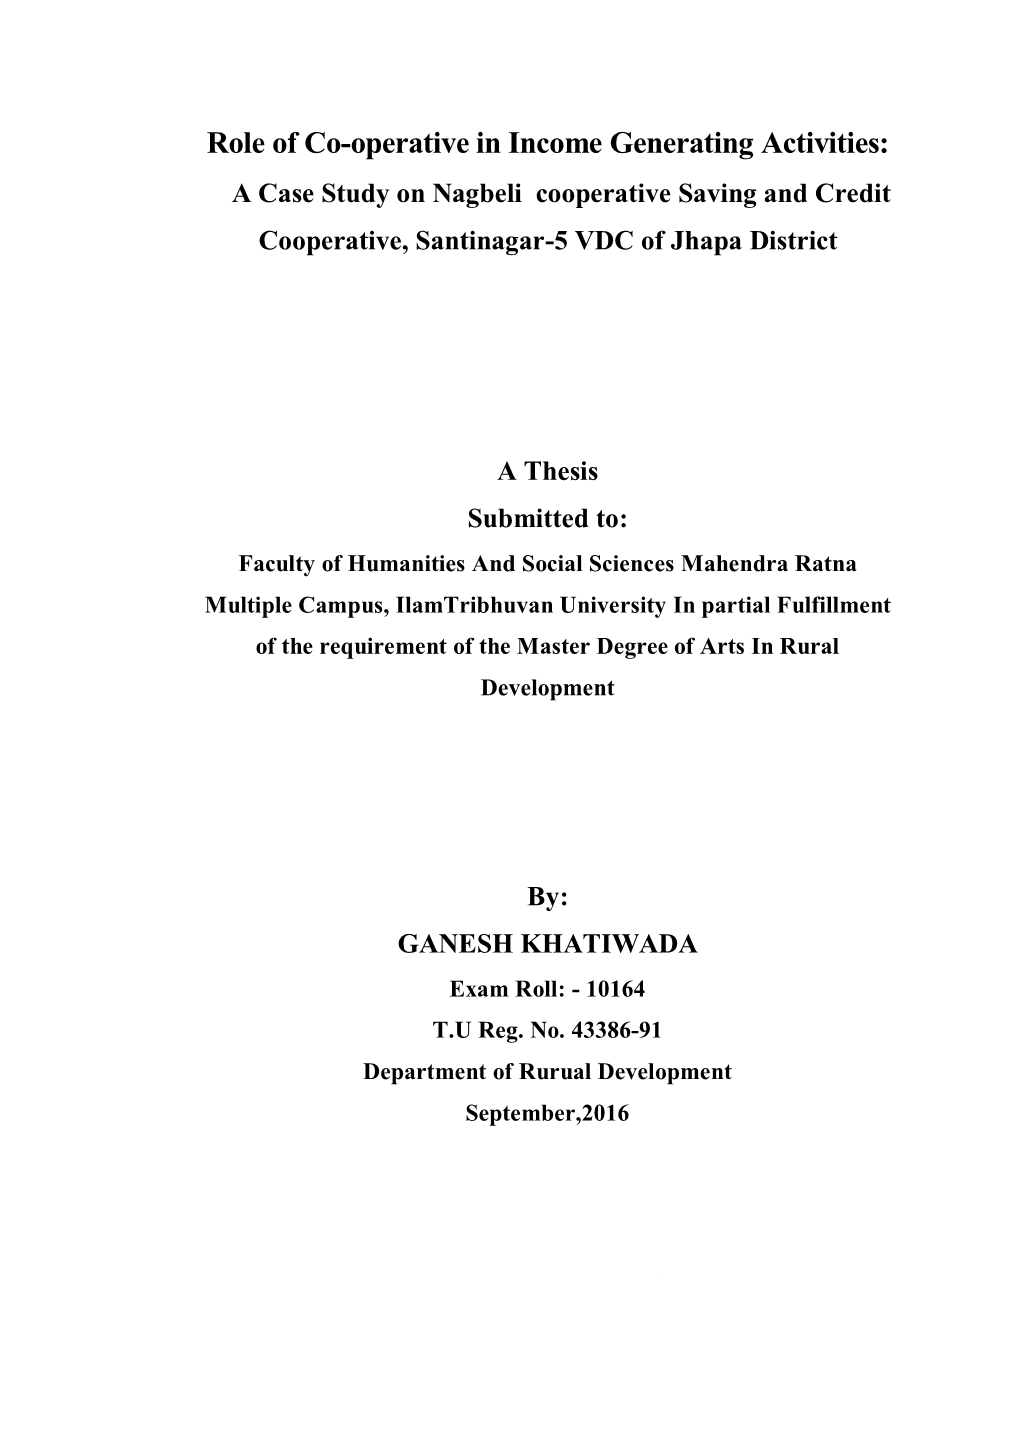 Role of Co-Operative in Income Generating Activities (A Case Study